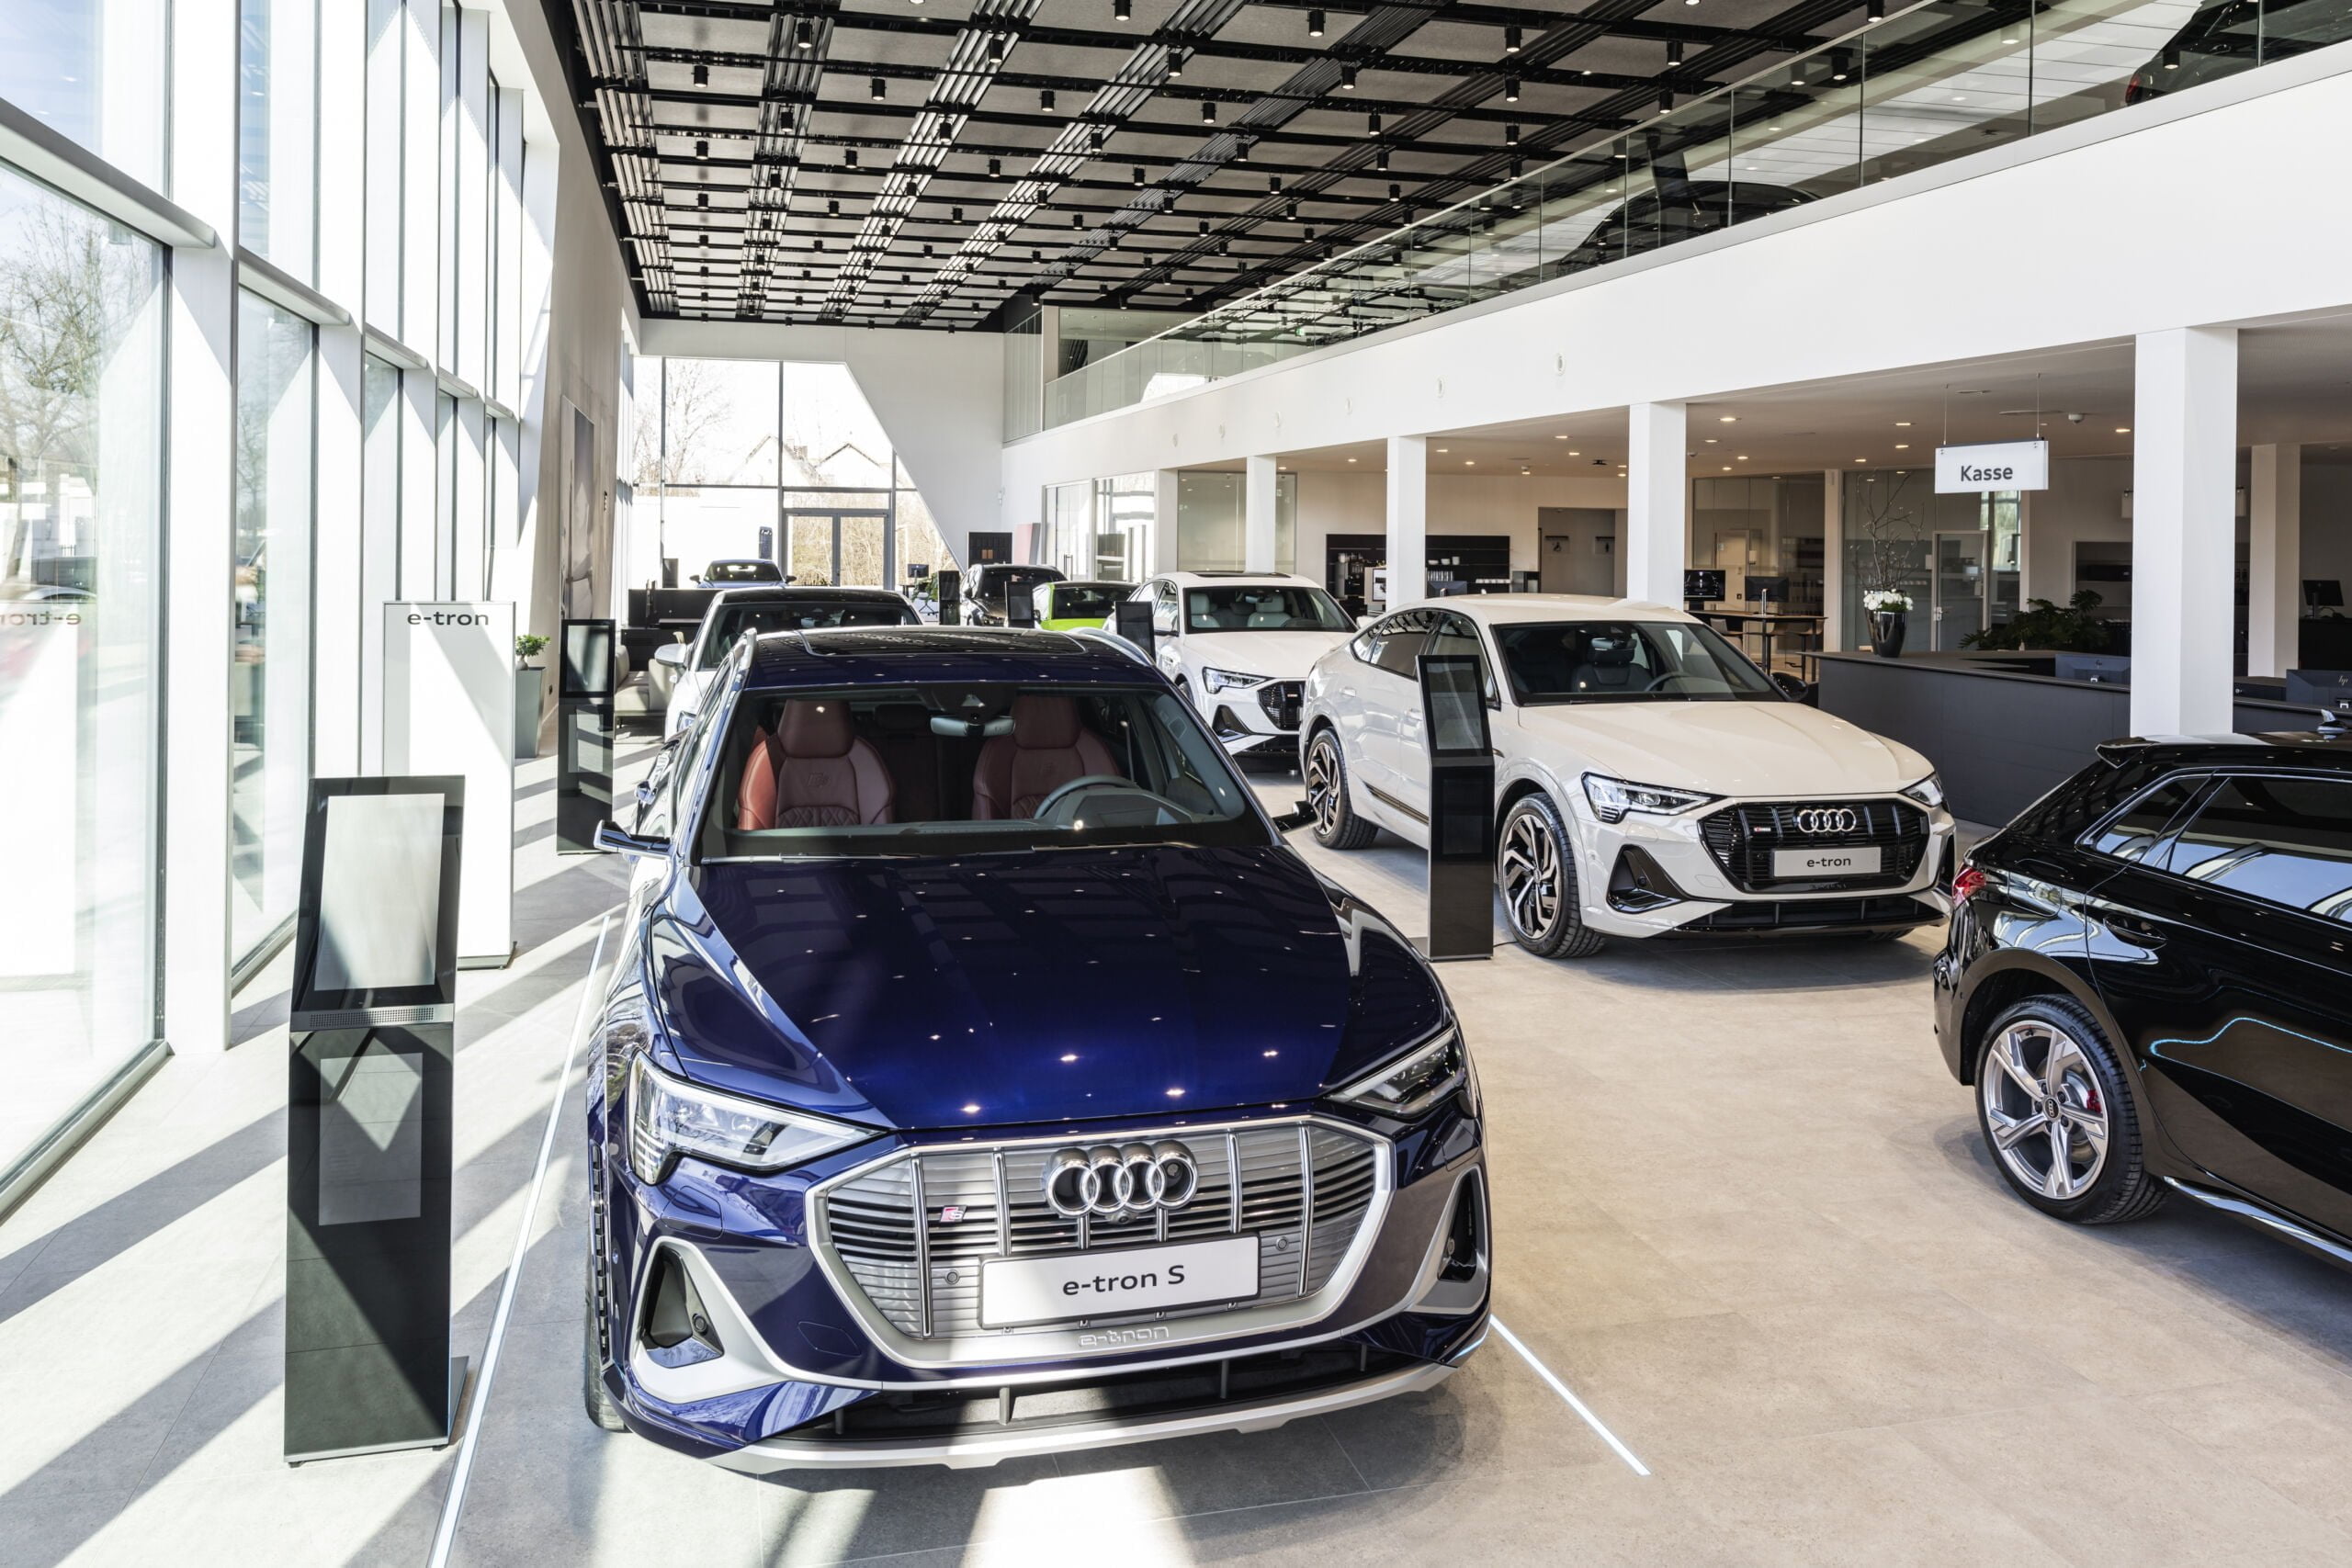 In the Trudering district of Munich, the Four Rings brand has opened a new pilot outlet that makes the brand experience even more attractive for visitors and customers.